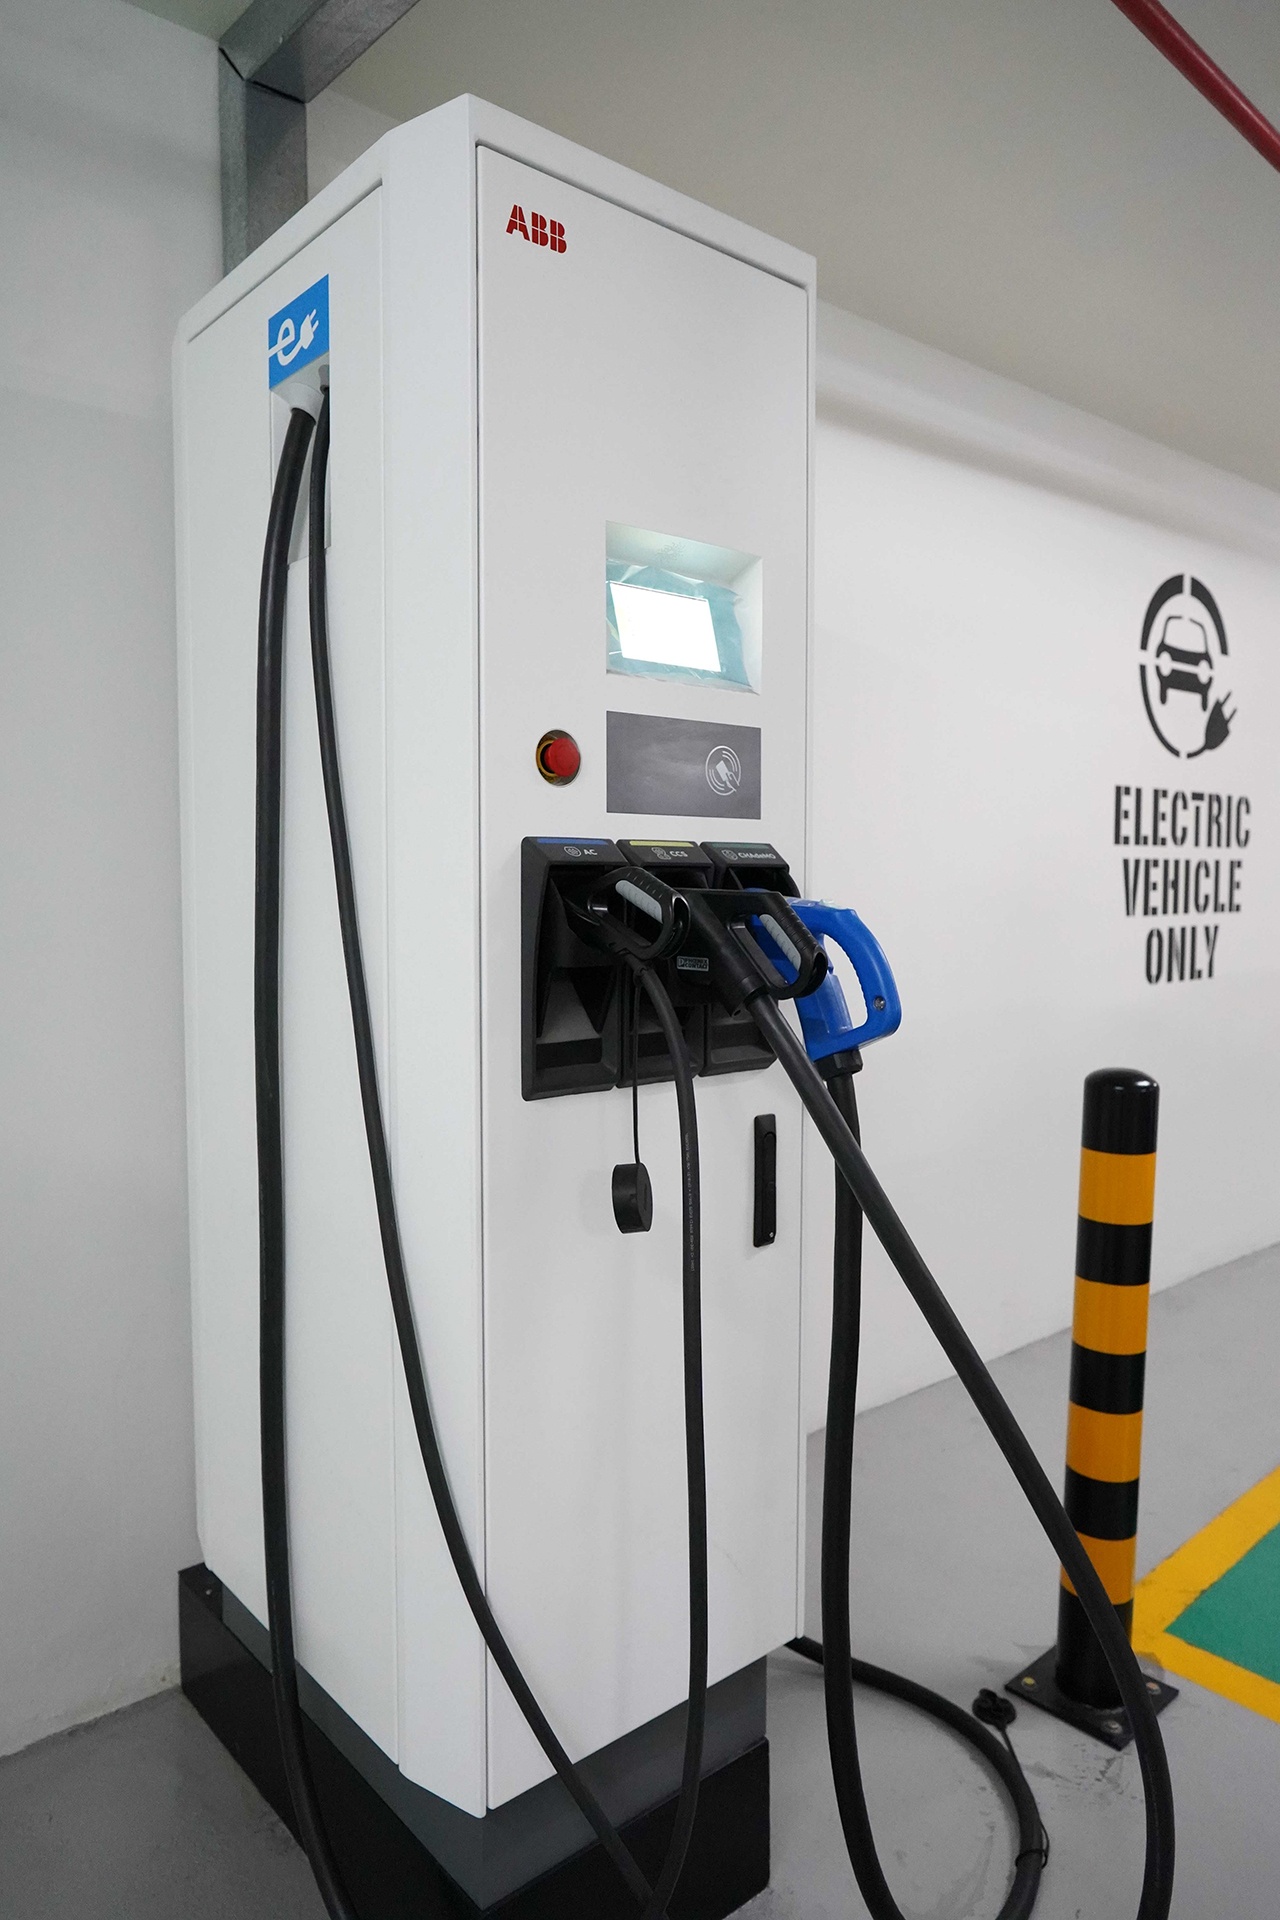 Electric Vehicle Charging Solutions Firm Enhances the UAE’s Electric Mobility with Extensive Knowledge, Innovative Expertise and One-Stop-Shop Capabilities